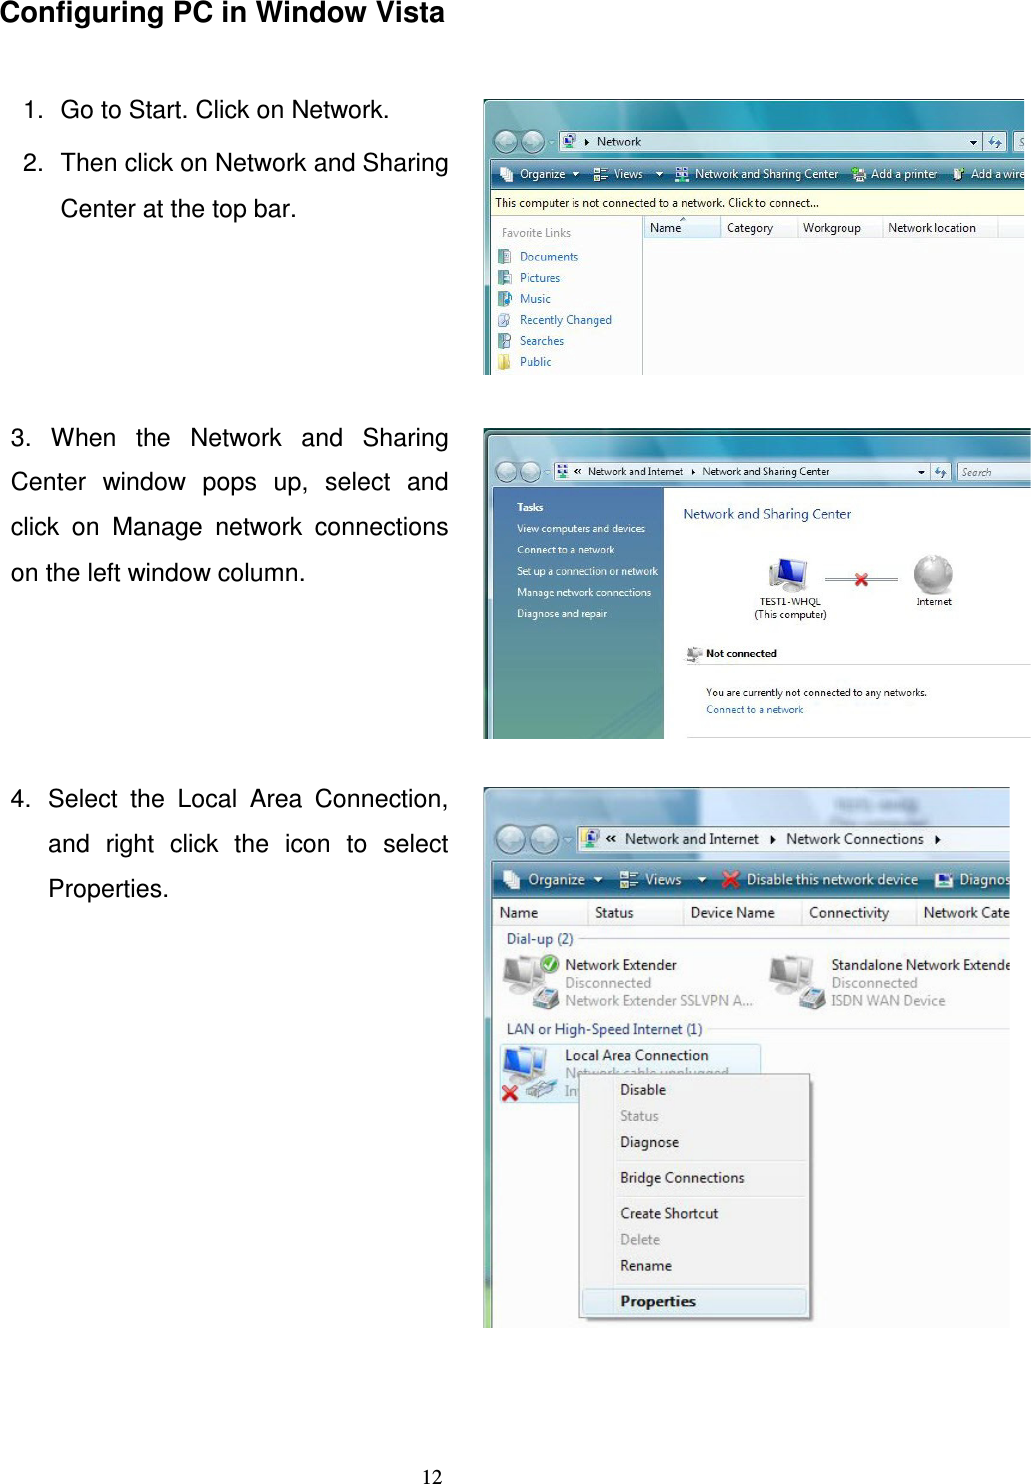   12Configuring PC in Window Vista  1.  Go to Start. Click on Network. 2.  Then click on Network and Sharing Center at the top bar.   3.  When  the  Network  and  Sharing Center  window  pops  up,  select  and click  on  Manage  network  connections on the left window column.   4.  Select  the  Local  Area  Connection, and  right  click  the  icon  to  select Properties.               